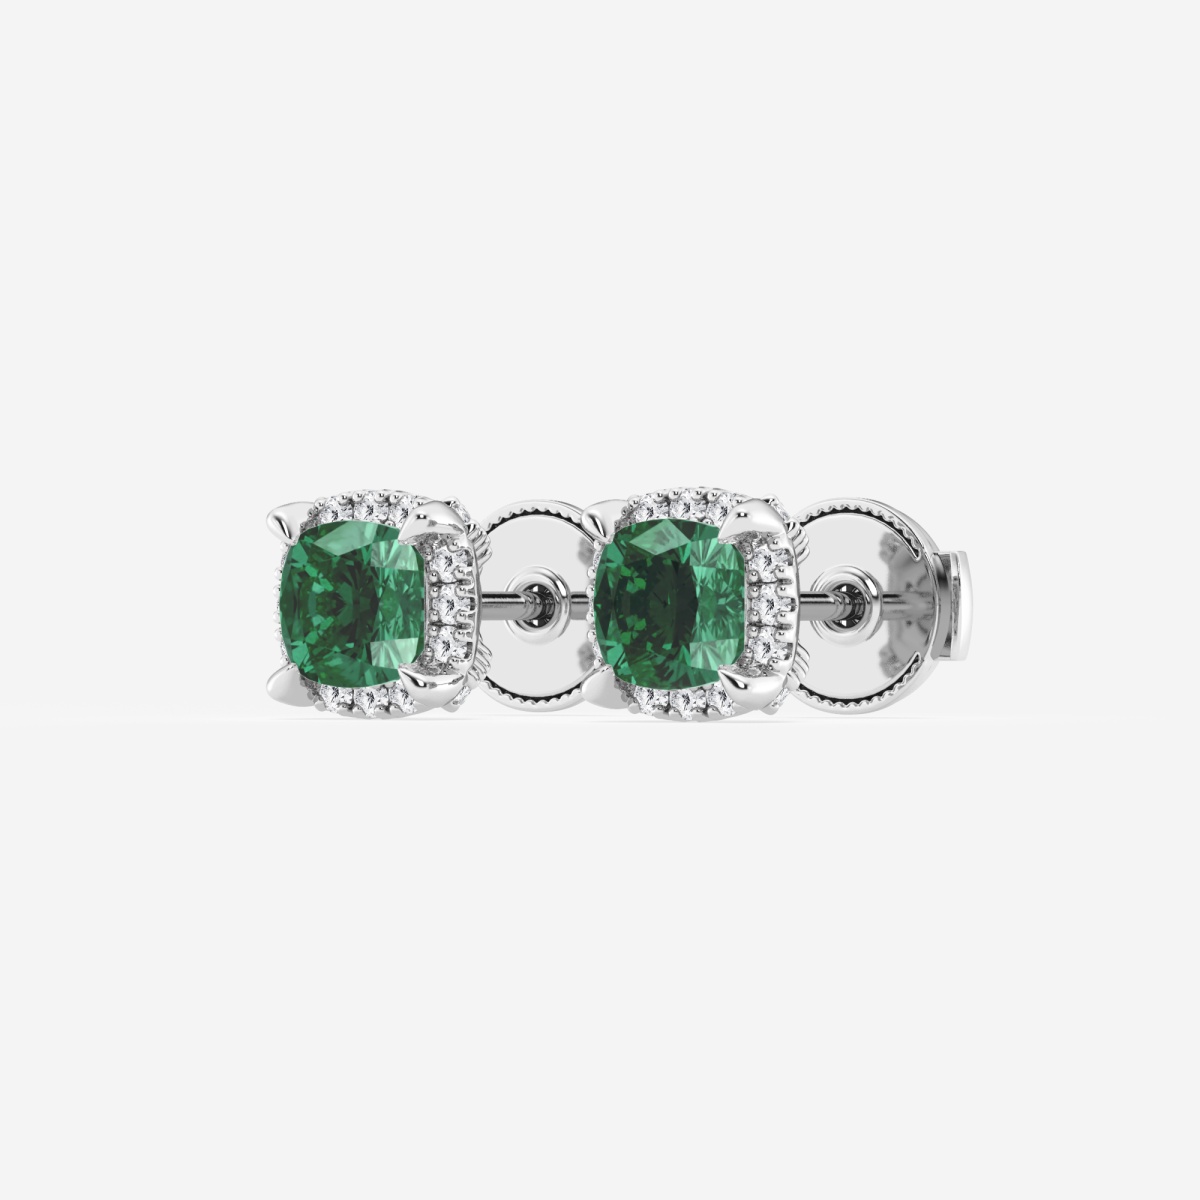 Additional Image 1 for  4.60X4.60 mm Cushion Cut Created Emerald and 1/5 ctw Round Lab Grown Diamond Shadow Halo Stud Earrings